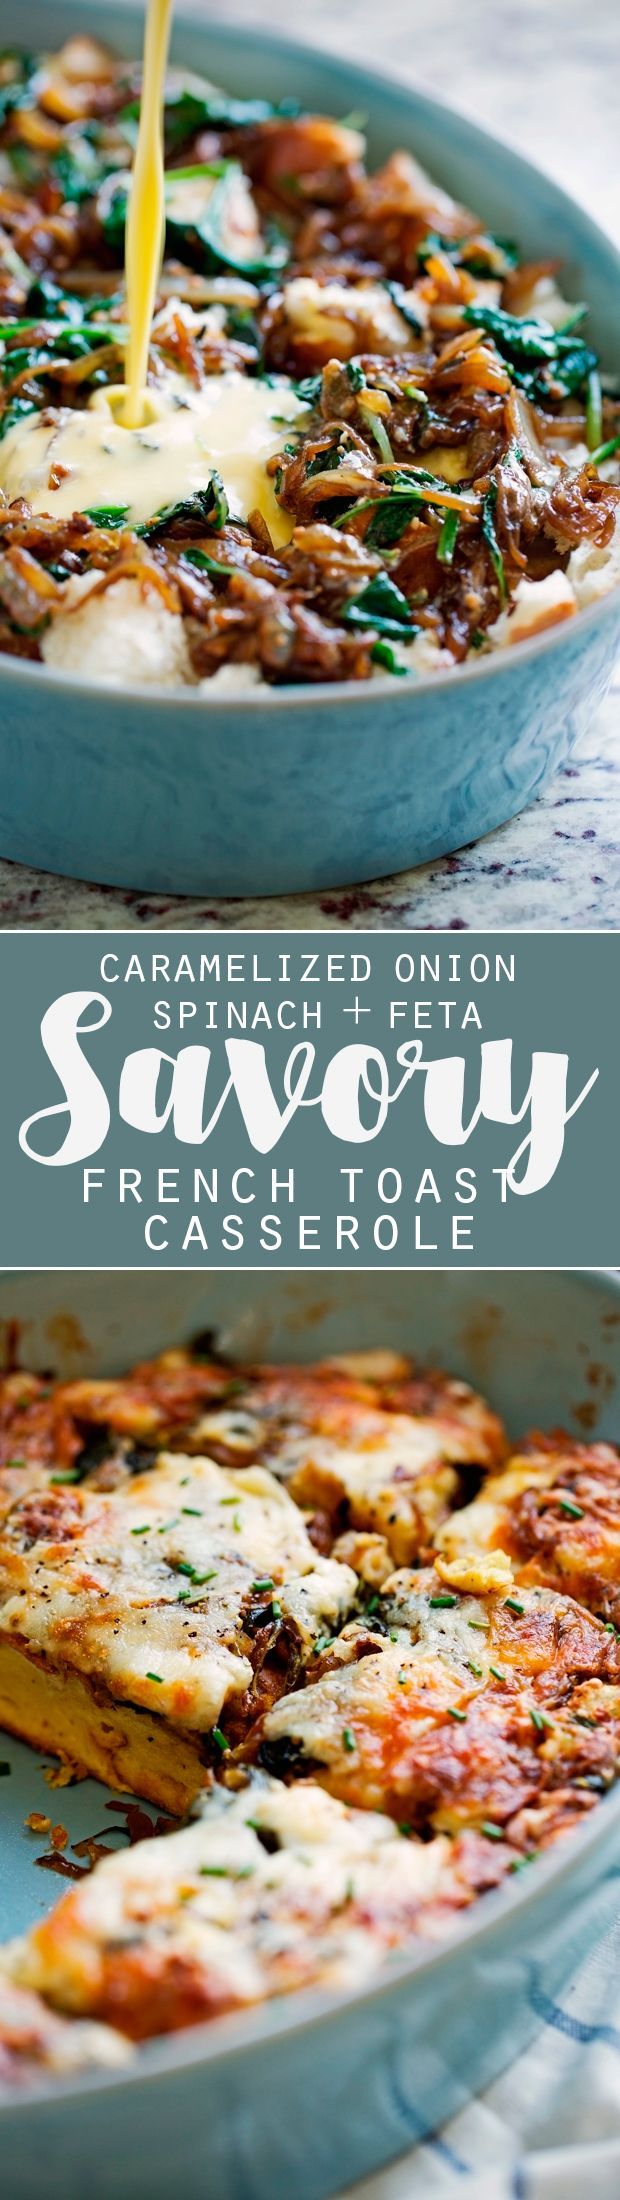 Caramelized Onion Spinach Savory French Toast Casserole Recipe | Little Spice Jar